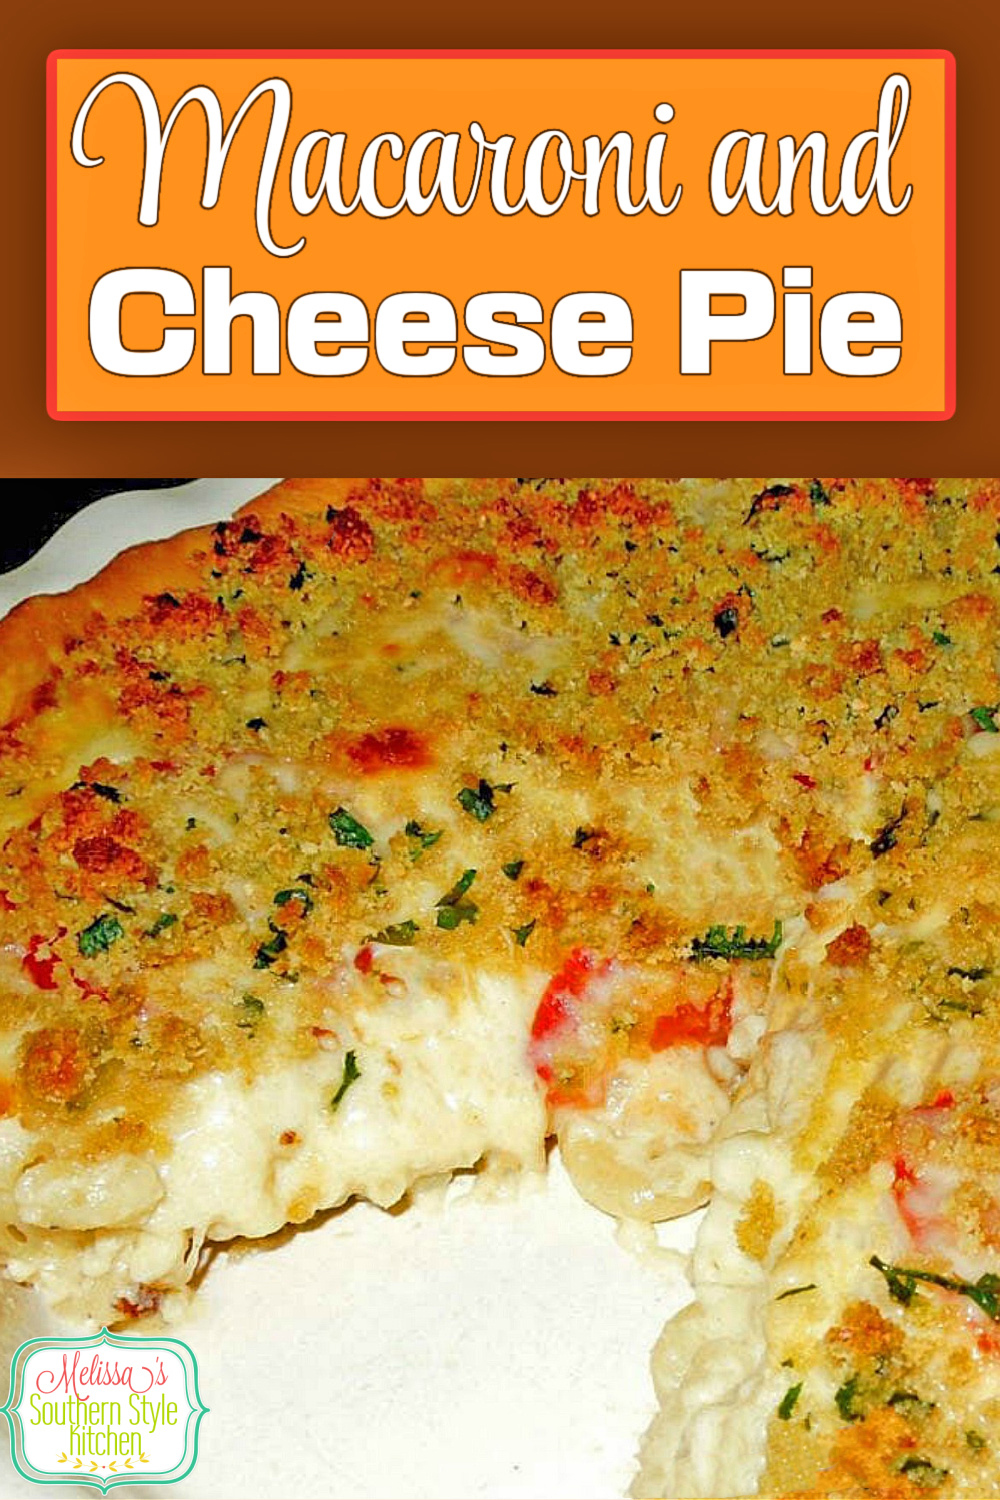 Enjoy a grown-up version of a comfort food classic #macaroniandcheese #macaroniandcheesepie #macaronipie #macaroni #pasta #cheese #plumtomatoes #dinner #dinnerideas #southernfood #southernrecipes via @melissasssk